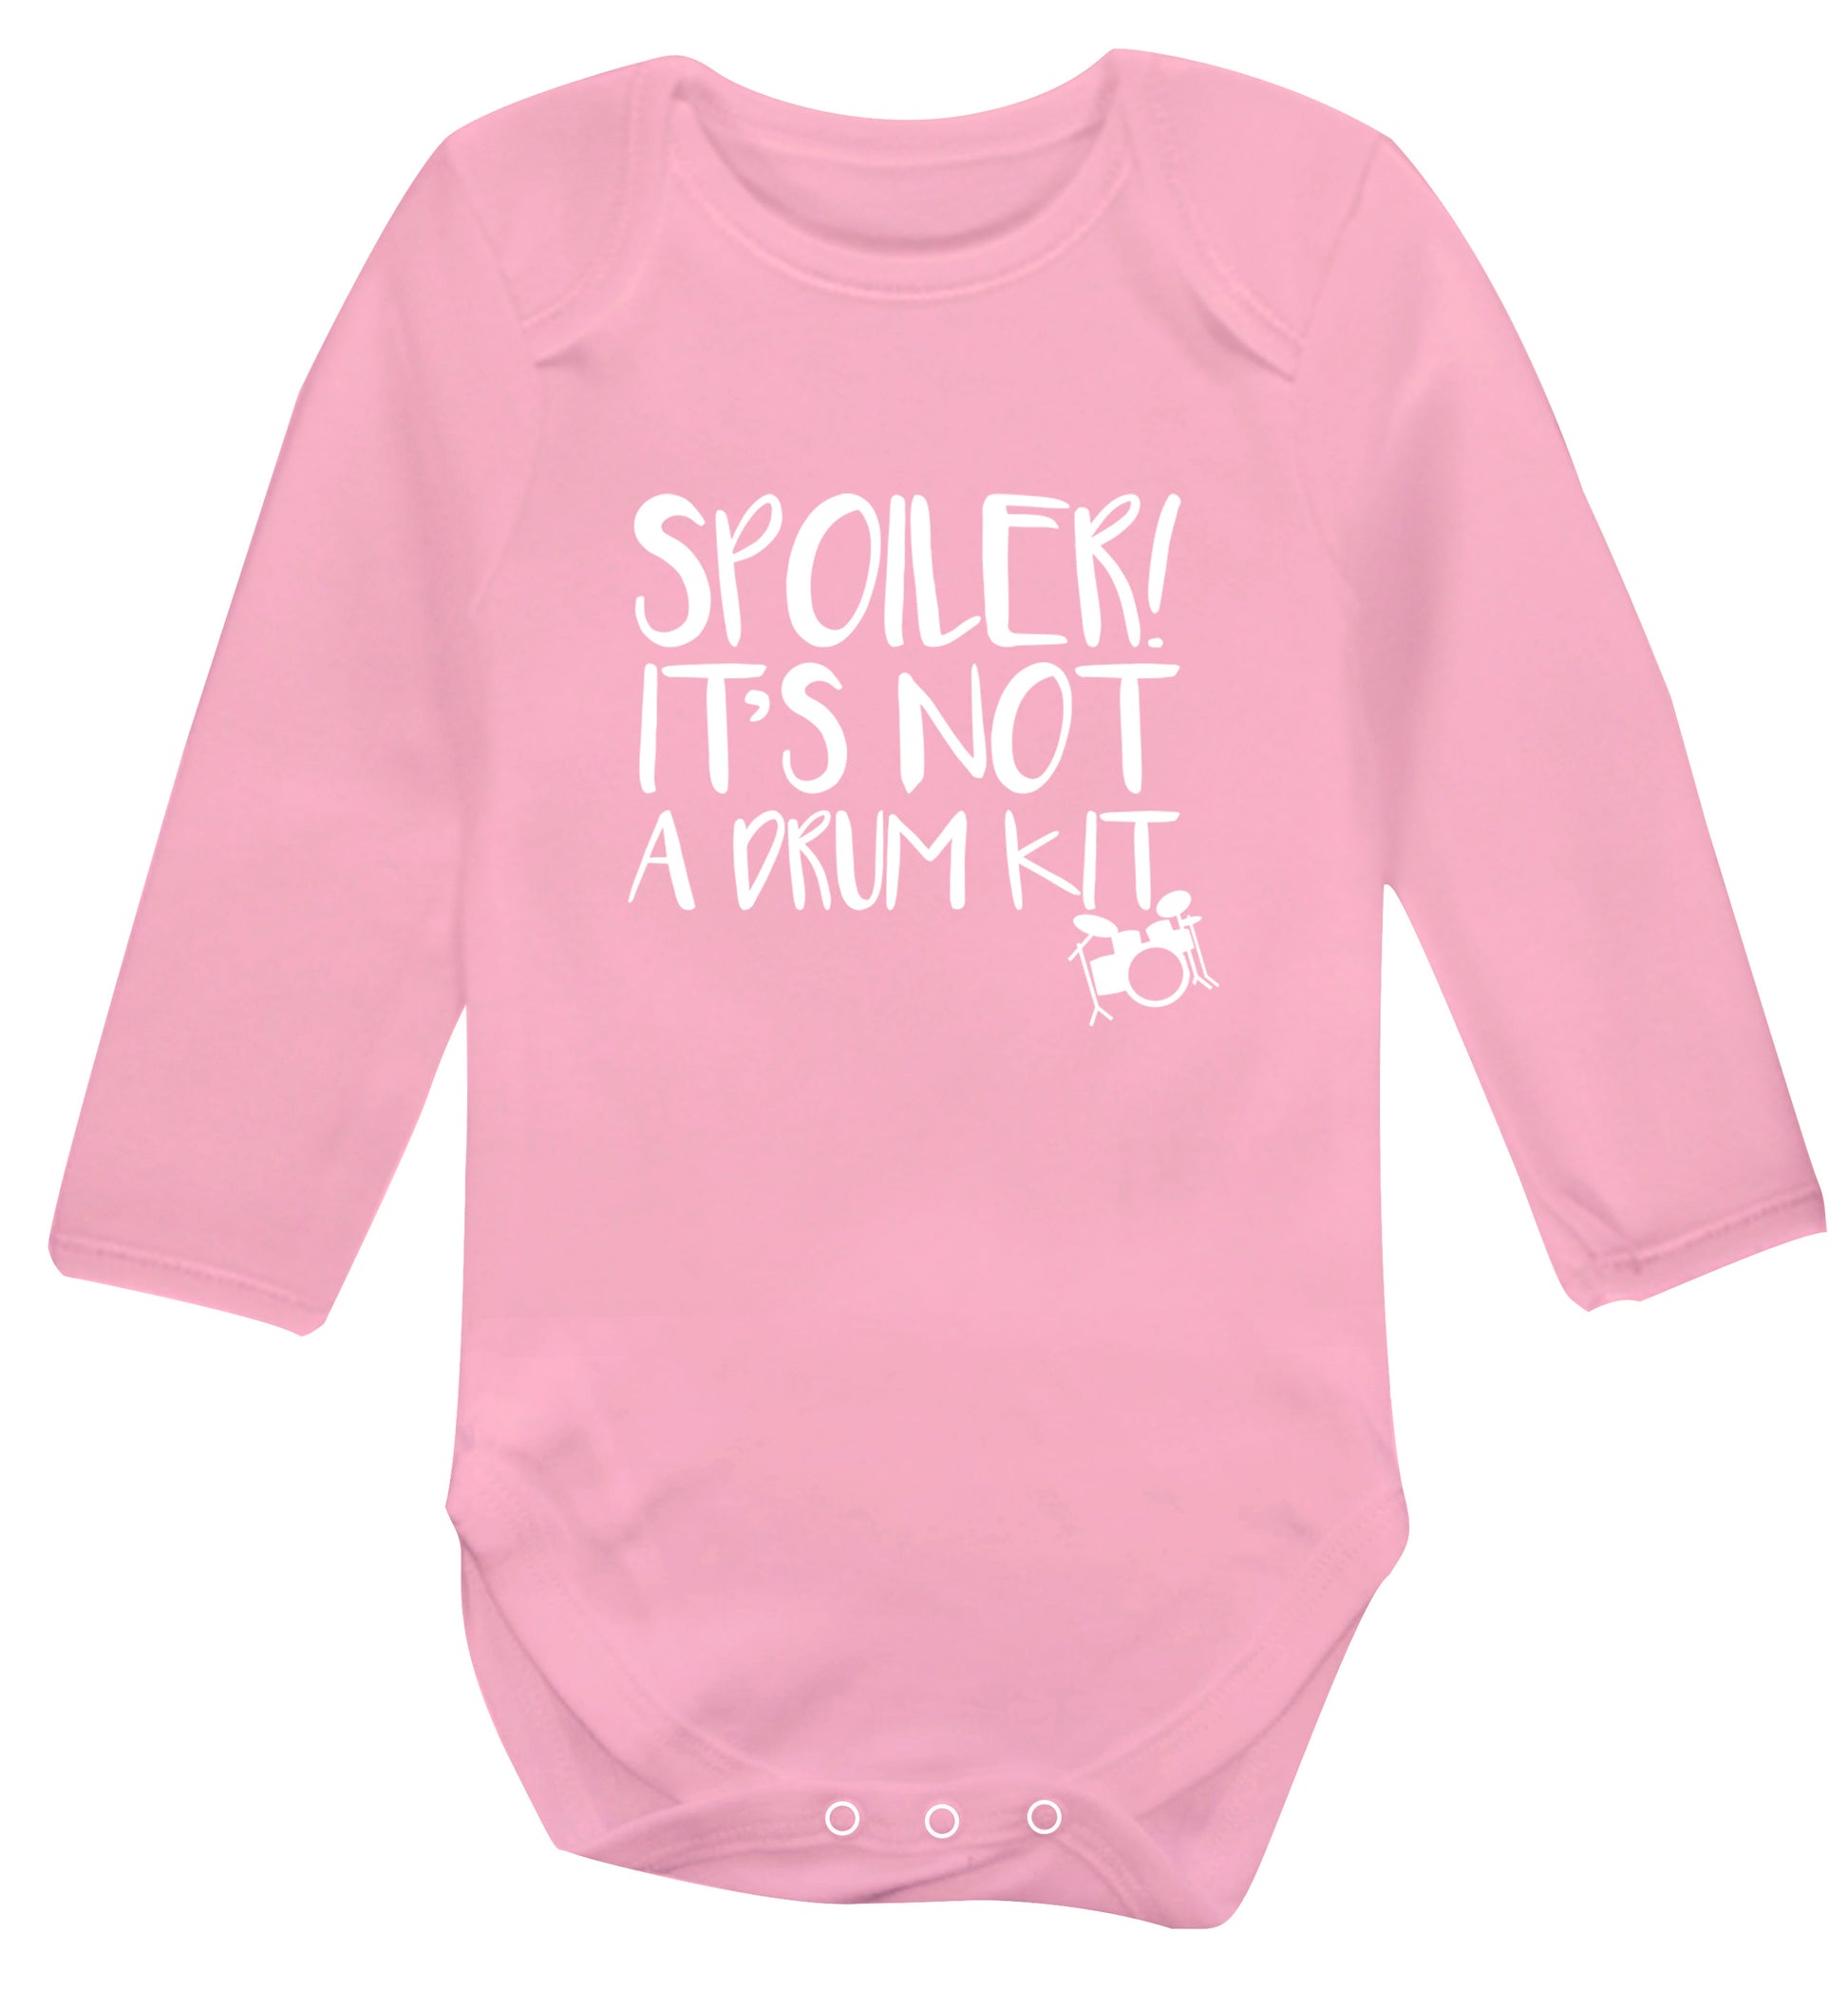 Spoiler it's not a drum kit Baby Vest long sleeved pale pink 6-12 months